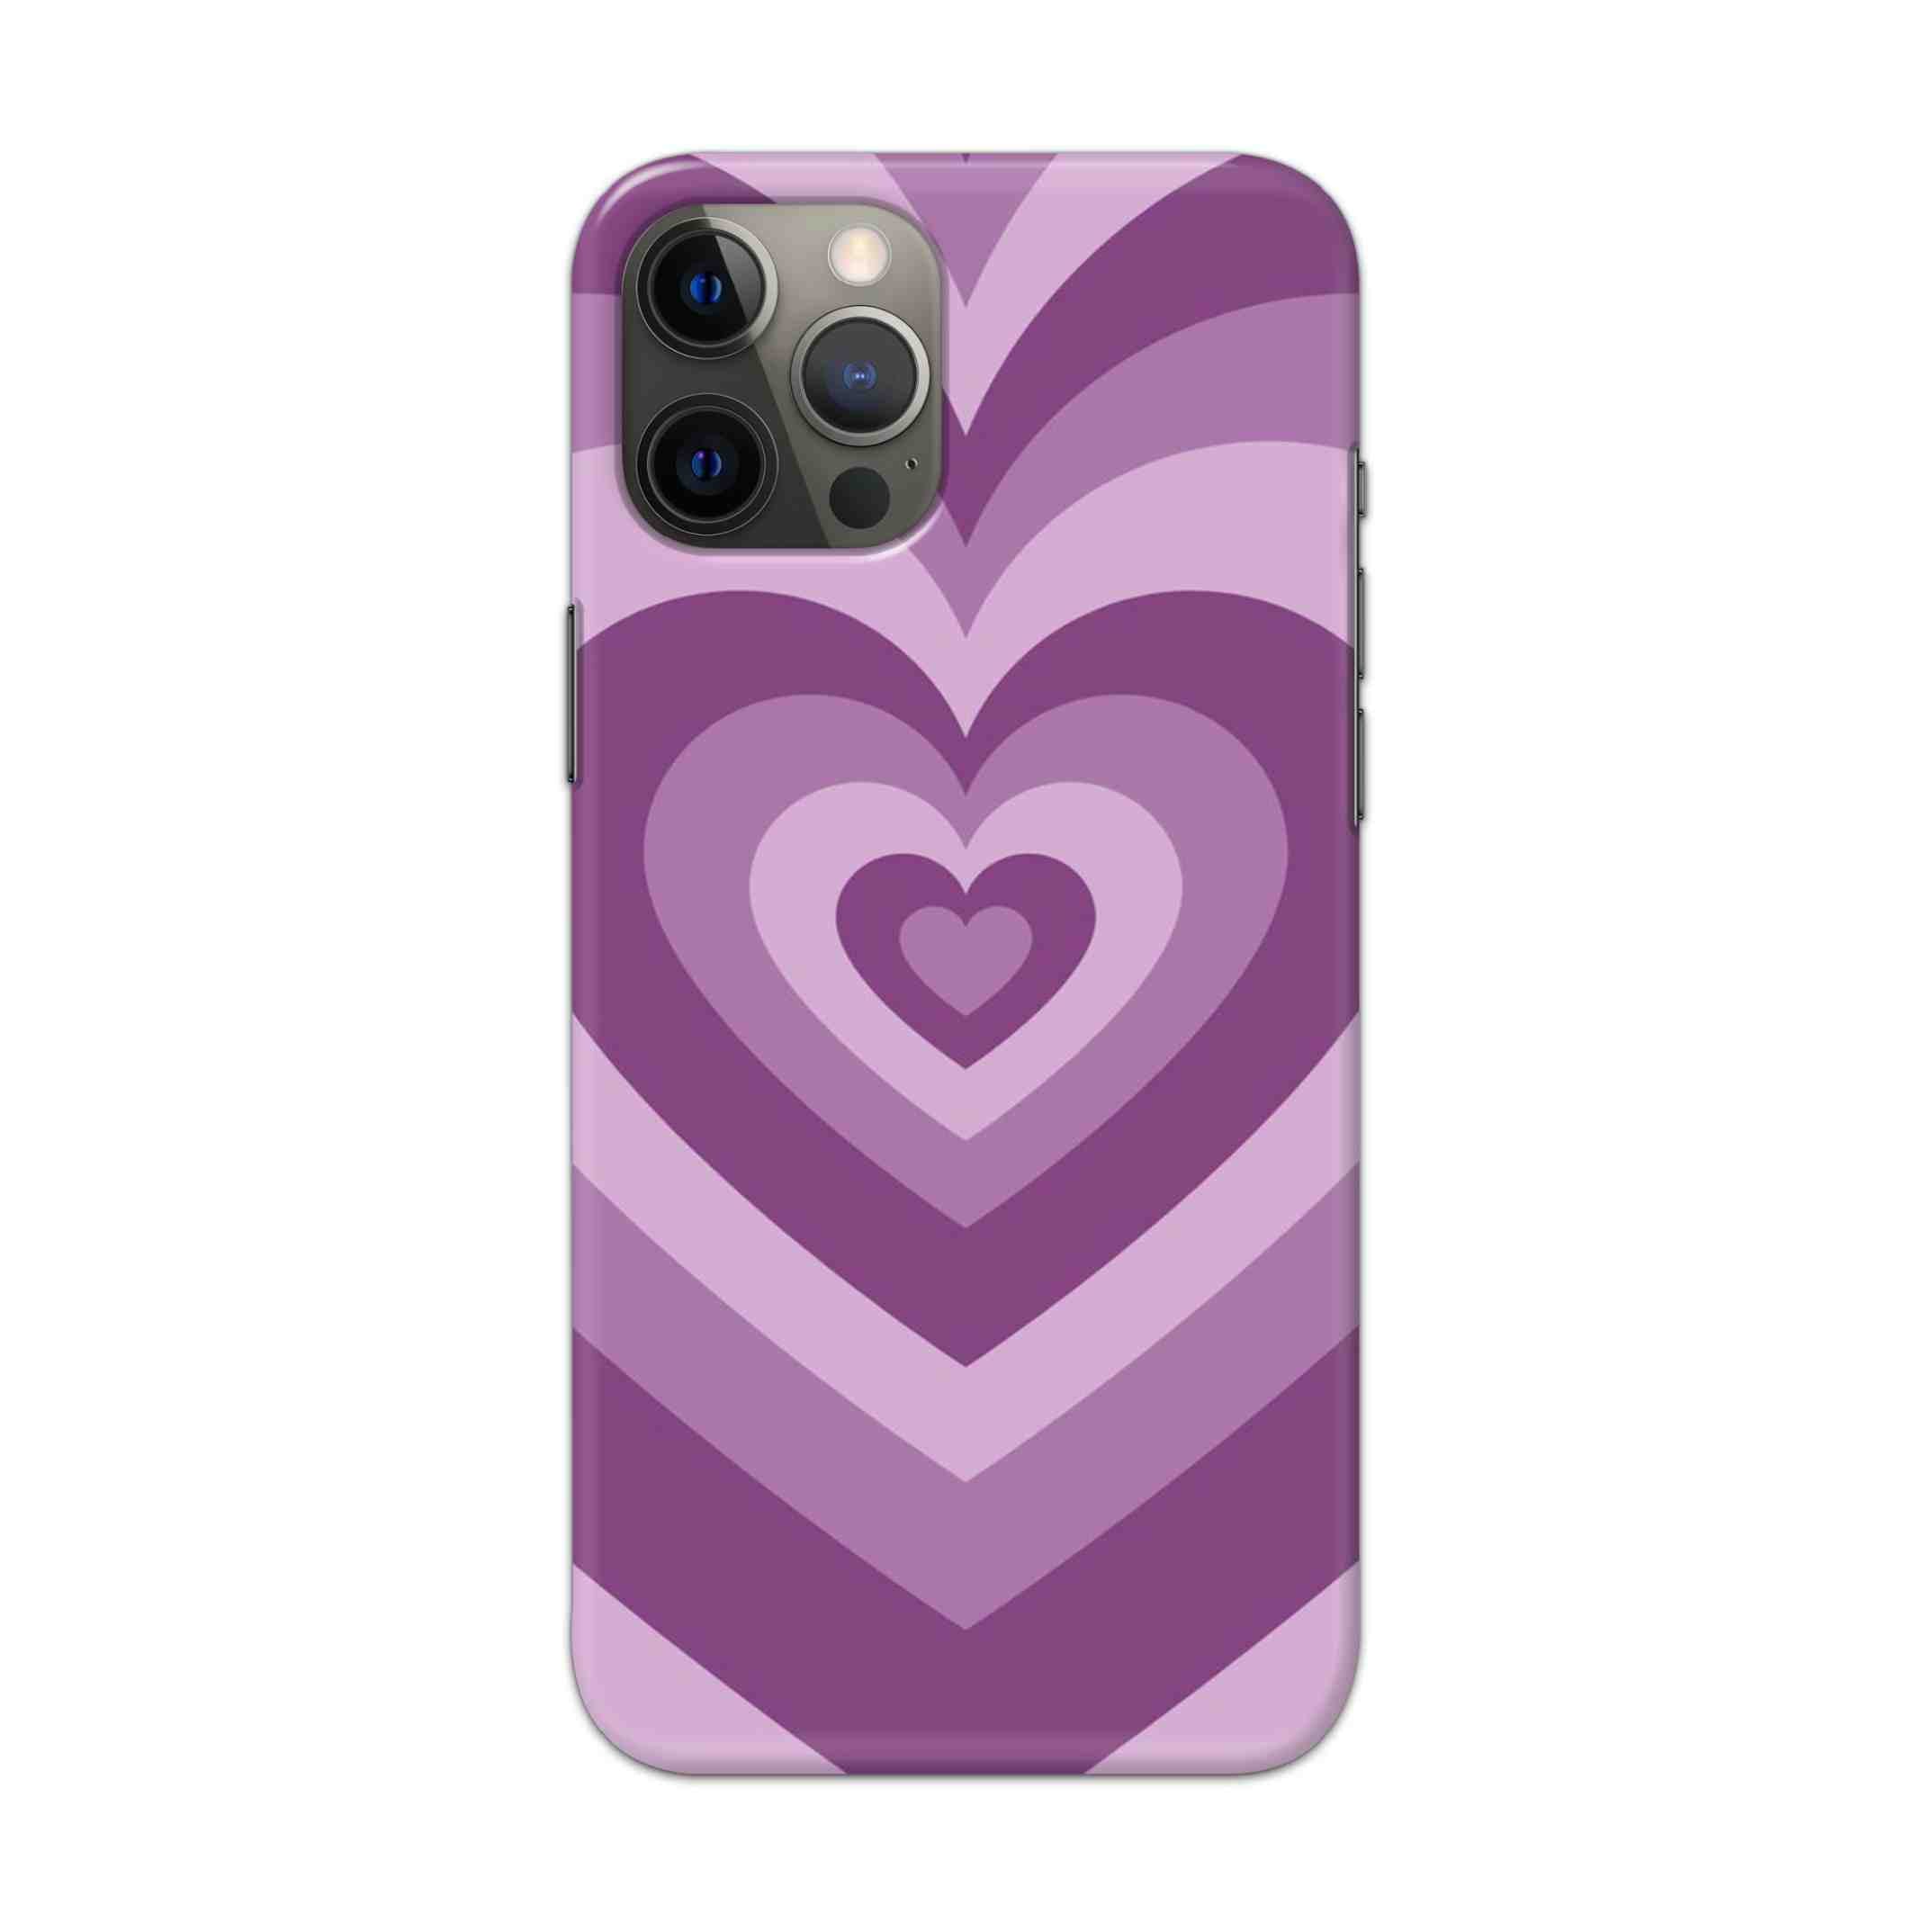 Buy Purple Heart Hard Back Mobile Phone Case Cover For Apple iPhone 12 pro max Online